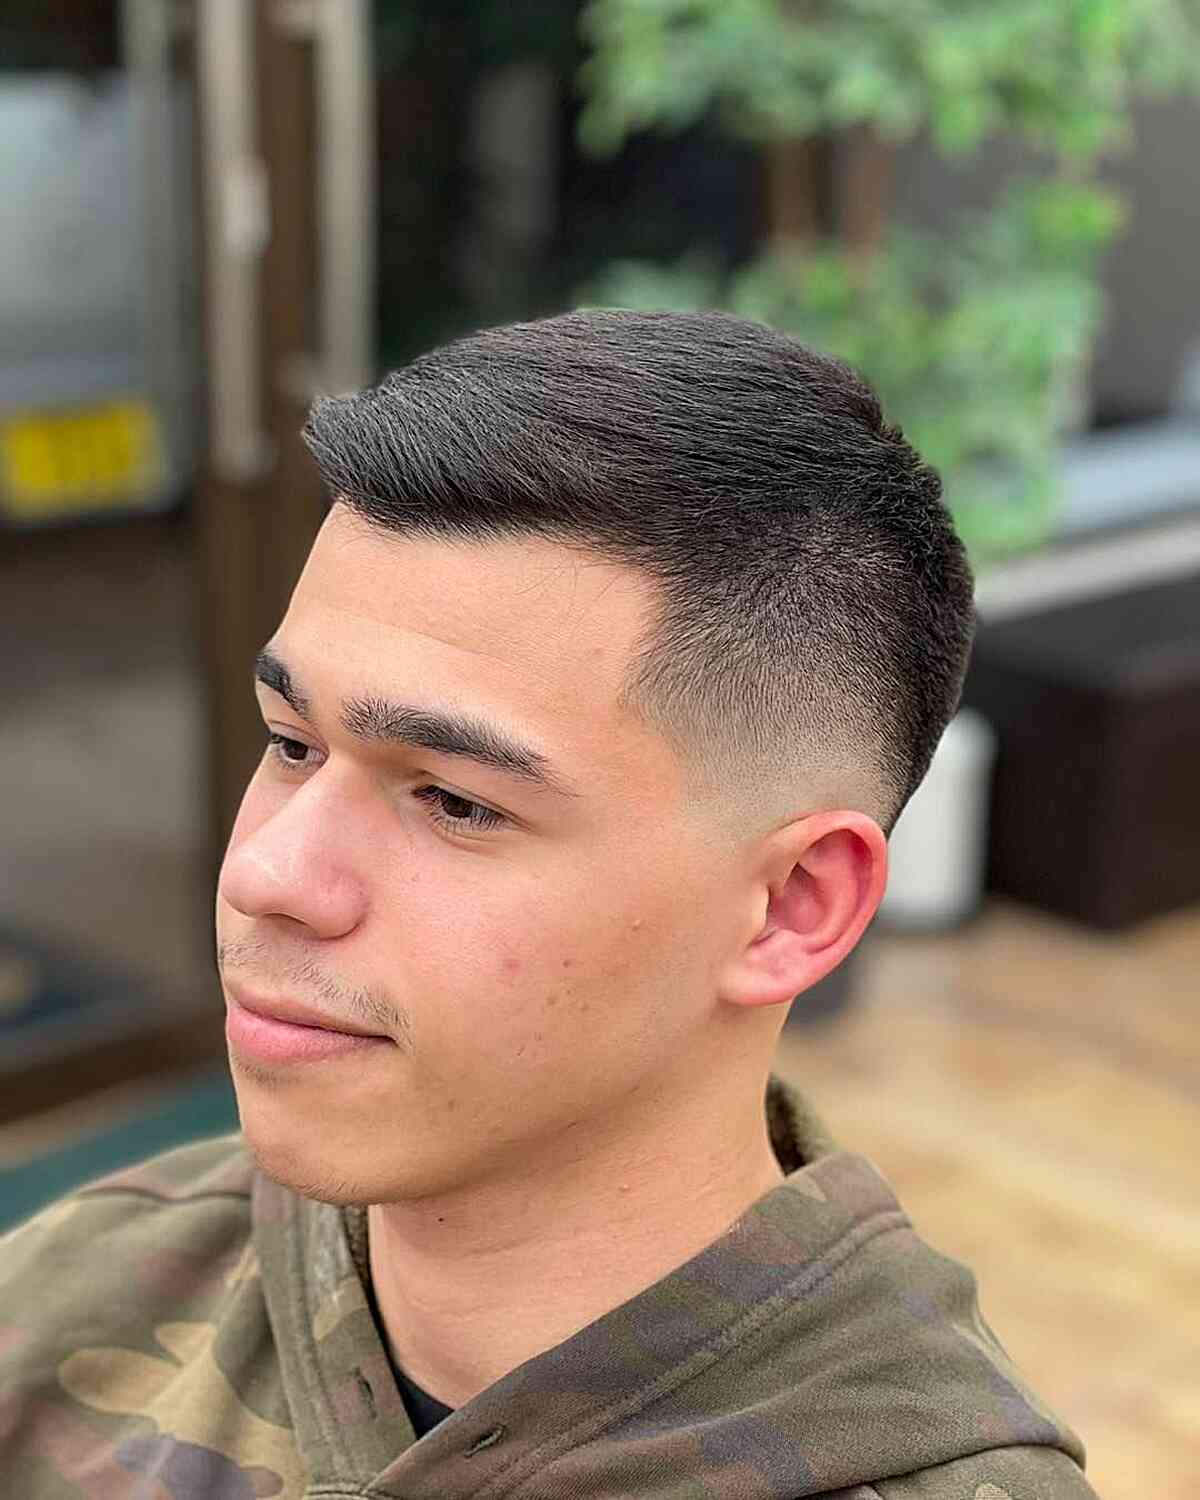 Short Skin Fade Low-Maintenance Cut with Tapered Sides on Young Gentlemen with no Beard